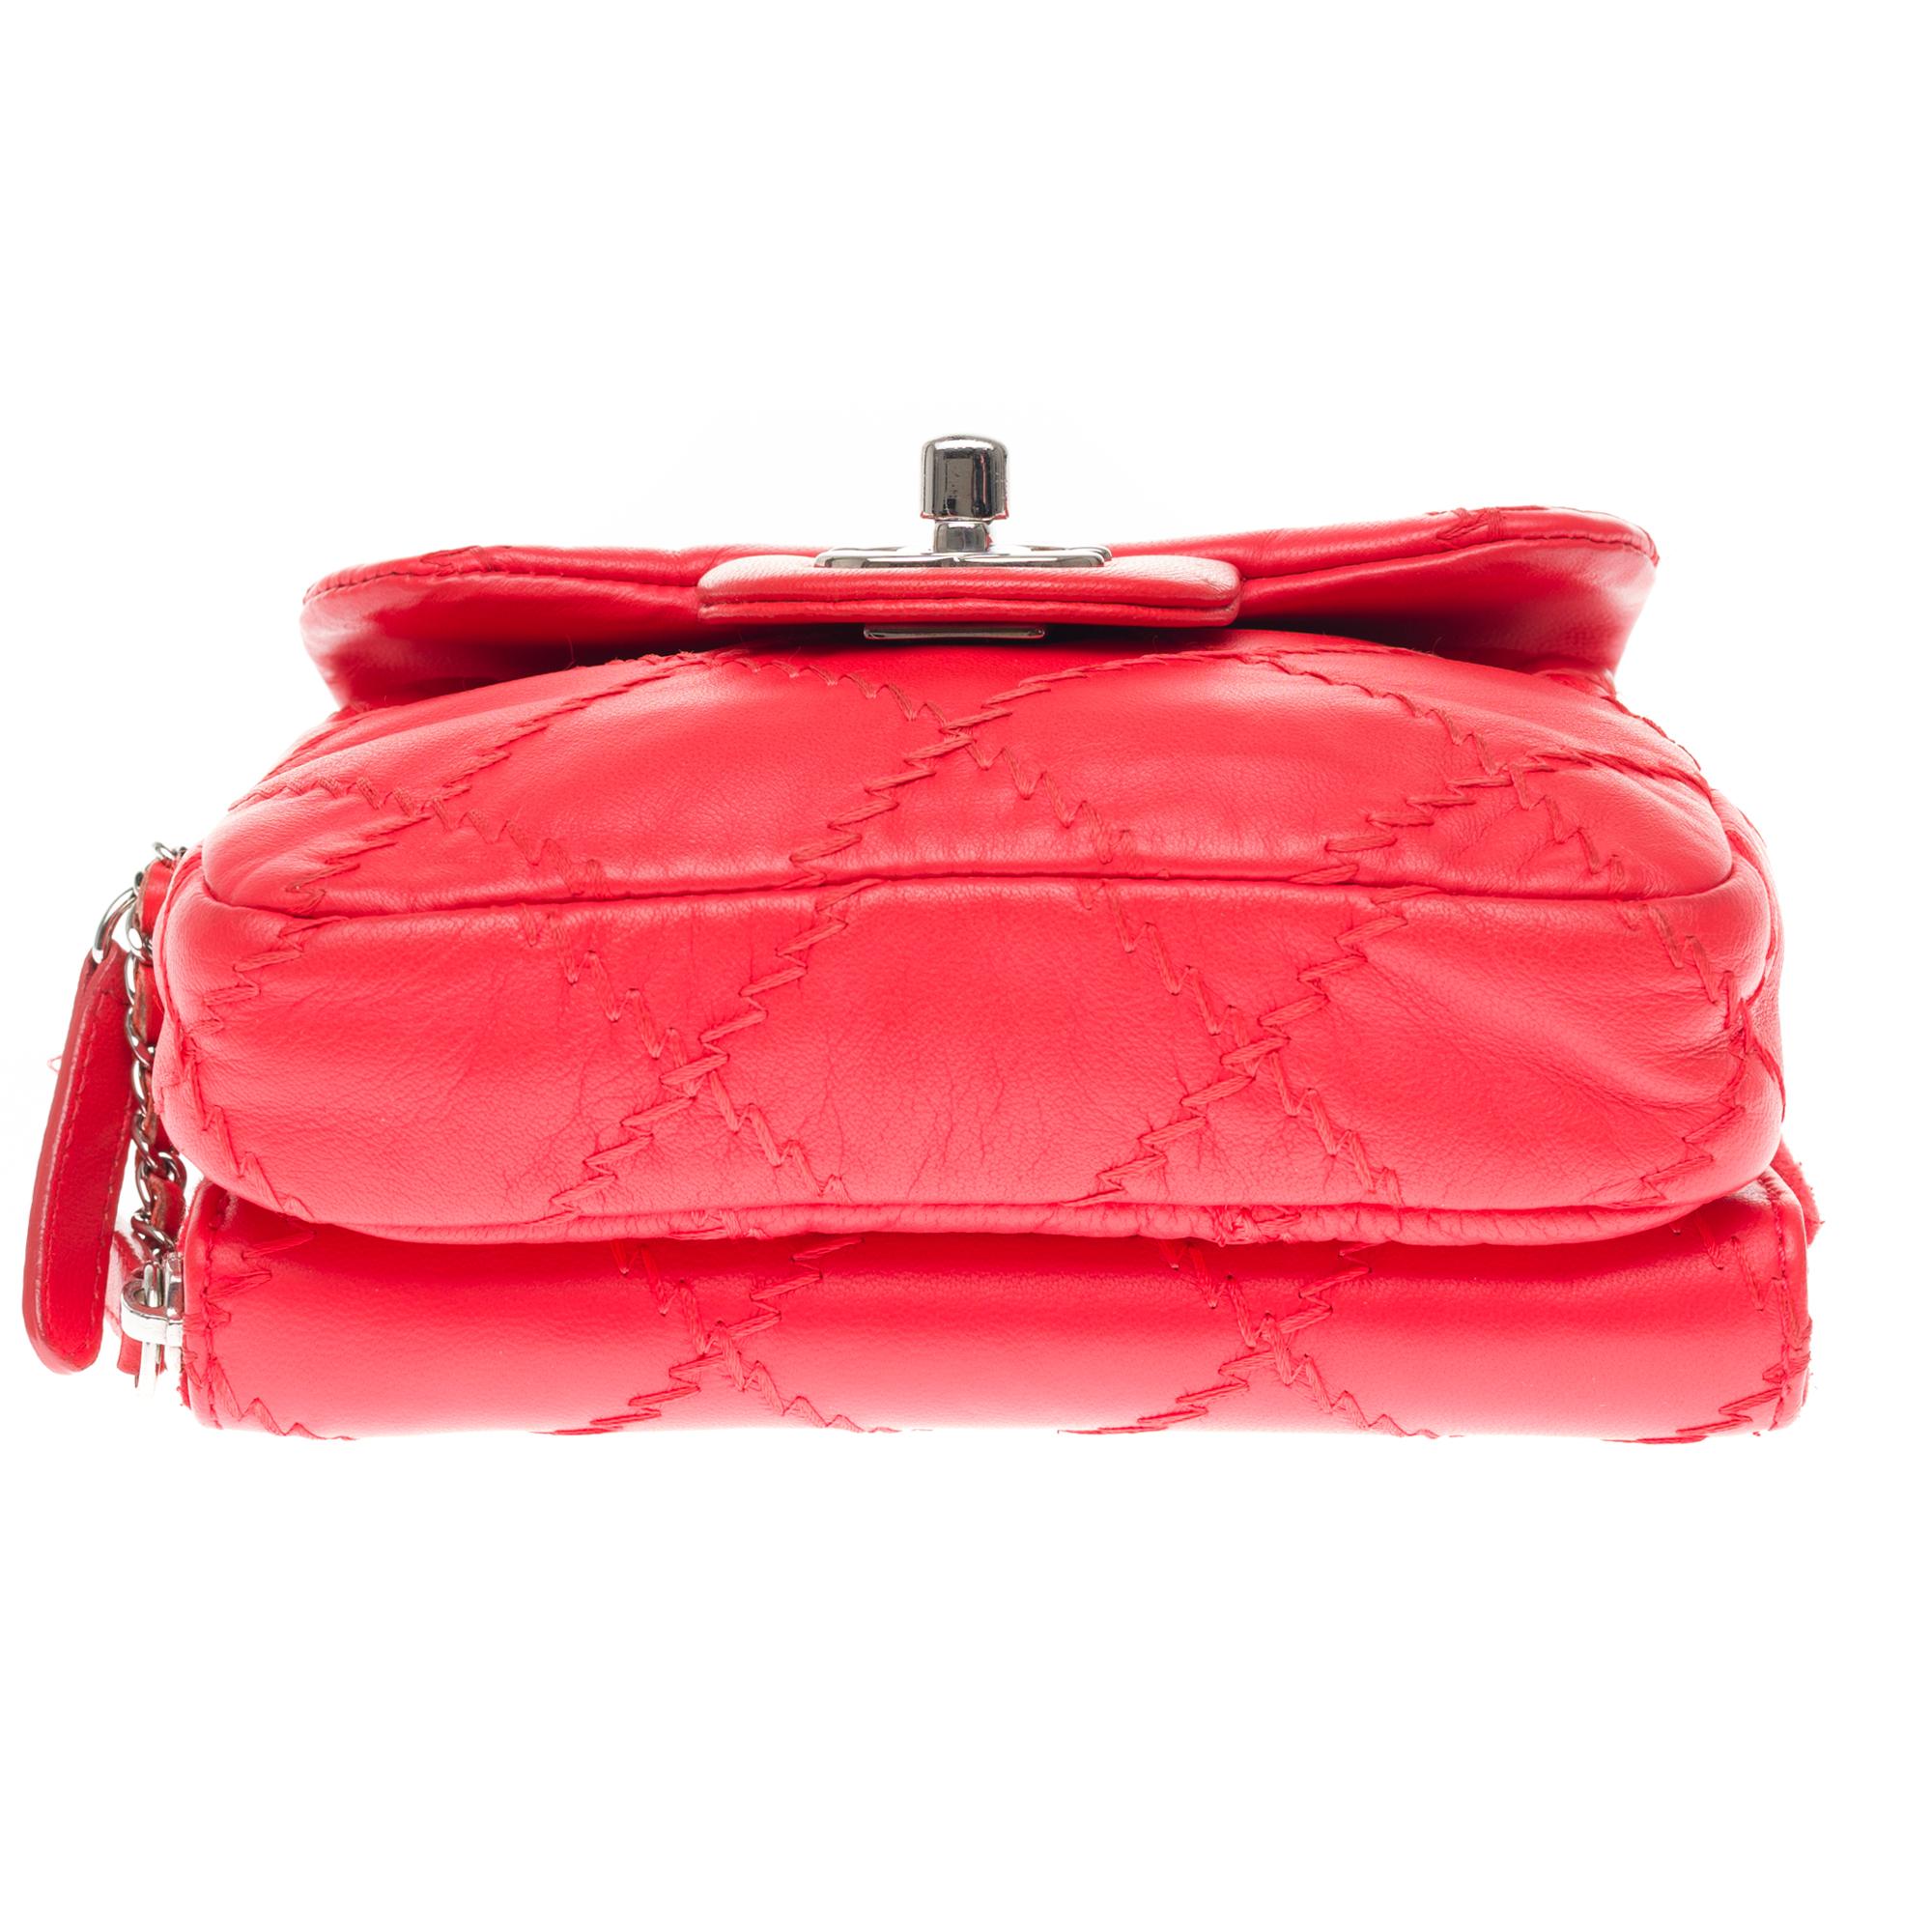 Amazing chanel Purse/Wallet in red leather and silver hardware 5